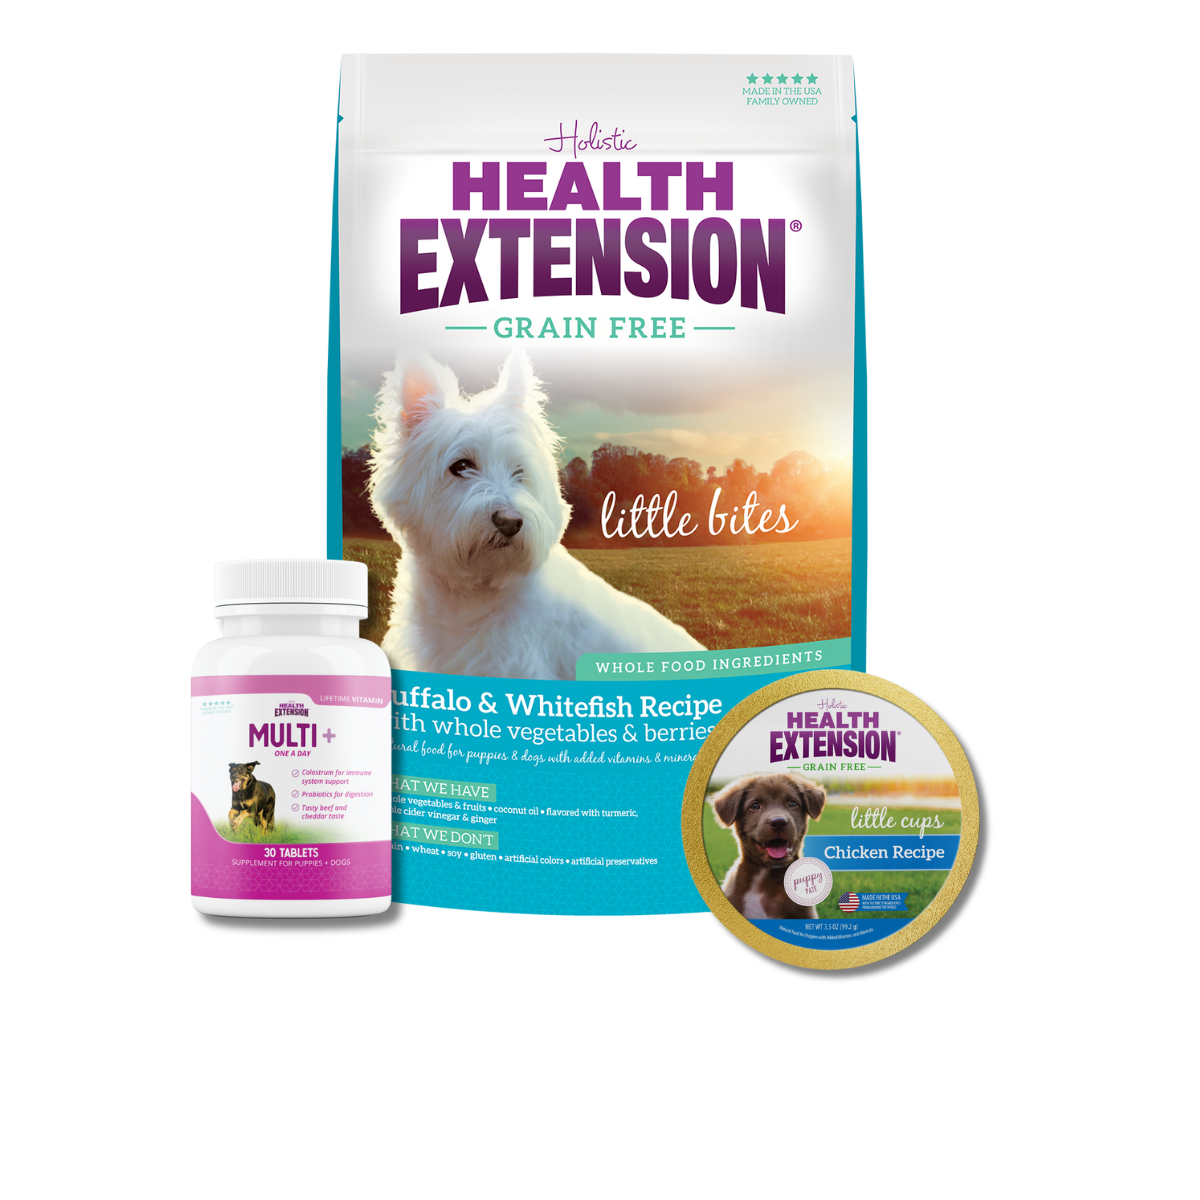 Puppy Trial Bundle for Small Breed: Bag of Health Extension Grain Free Buffalo & Whitefish Little Bites,  a bottle of Health Extension Multi+ vitamins for puppies and dogs, Grain Free Little Cups for Small Breeds